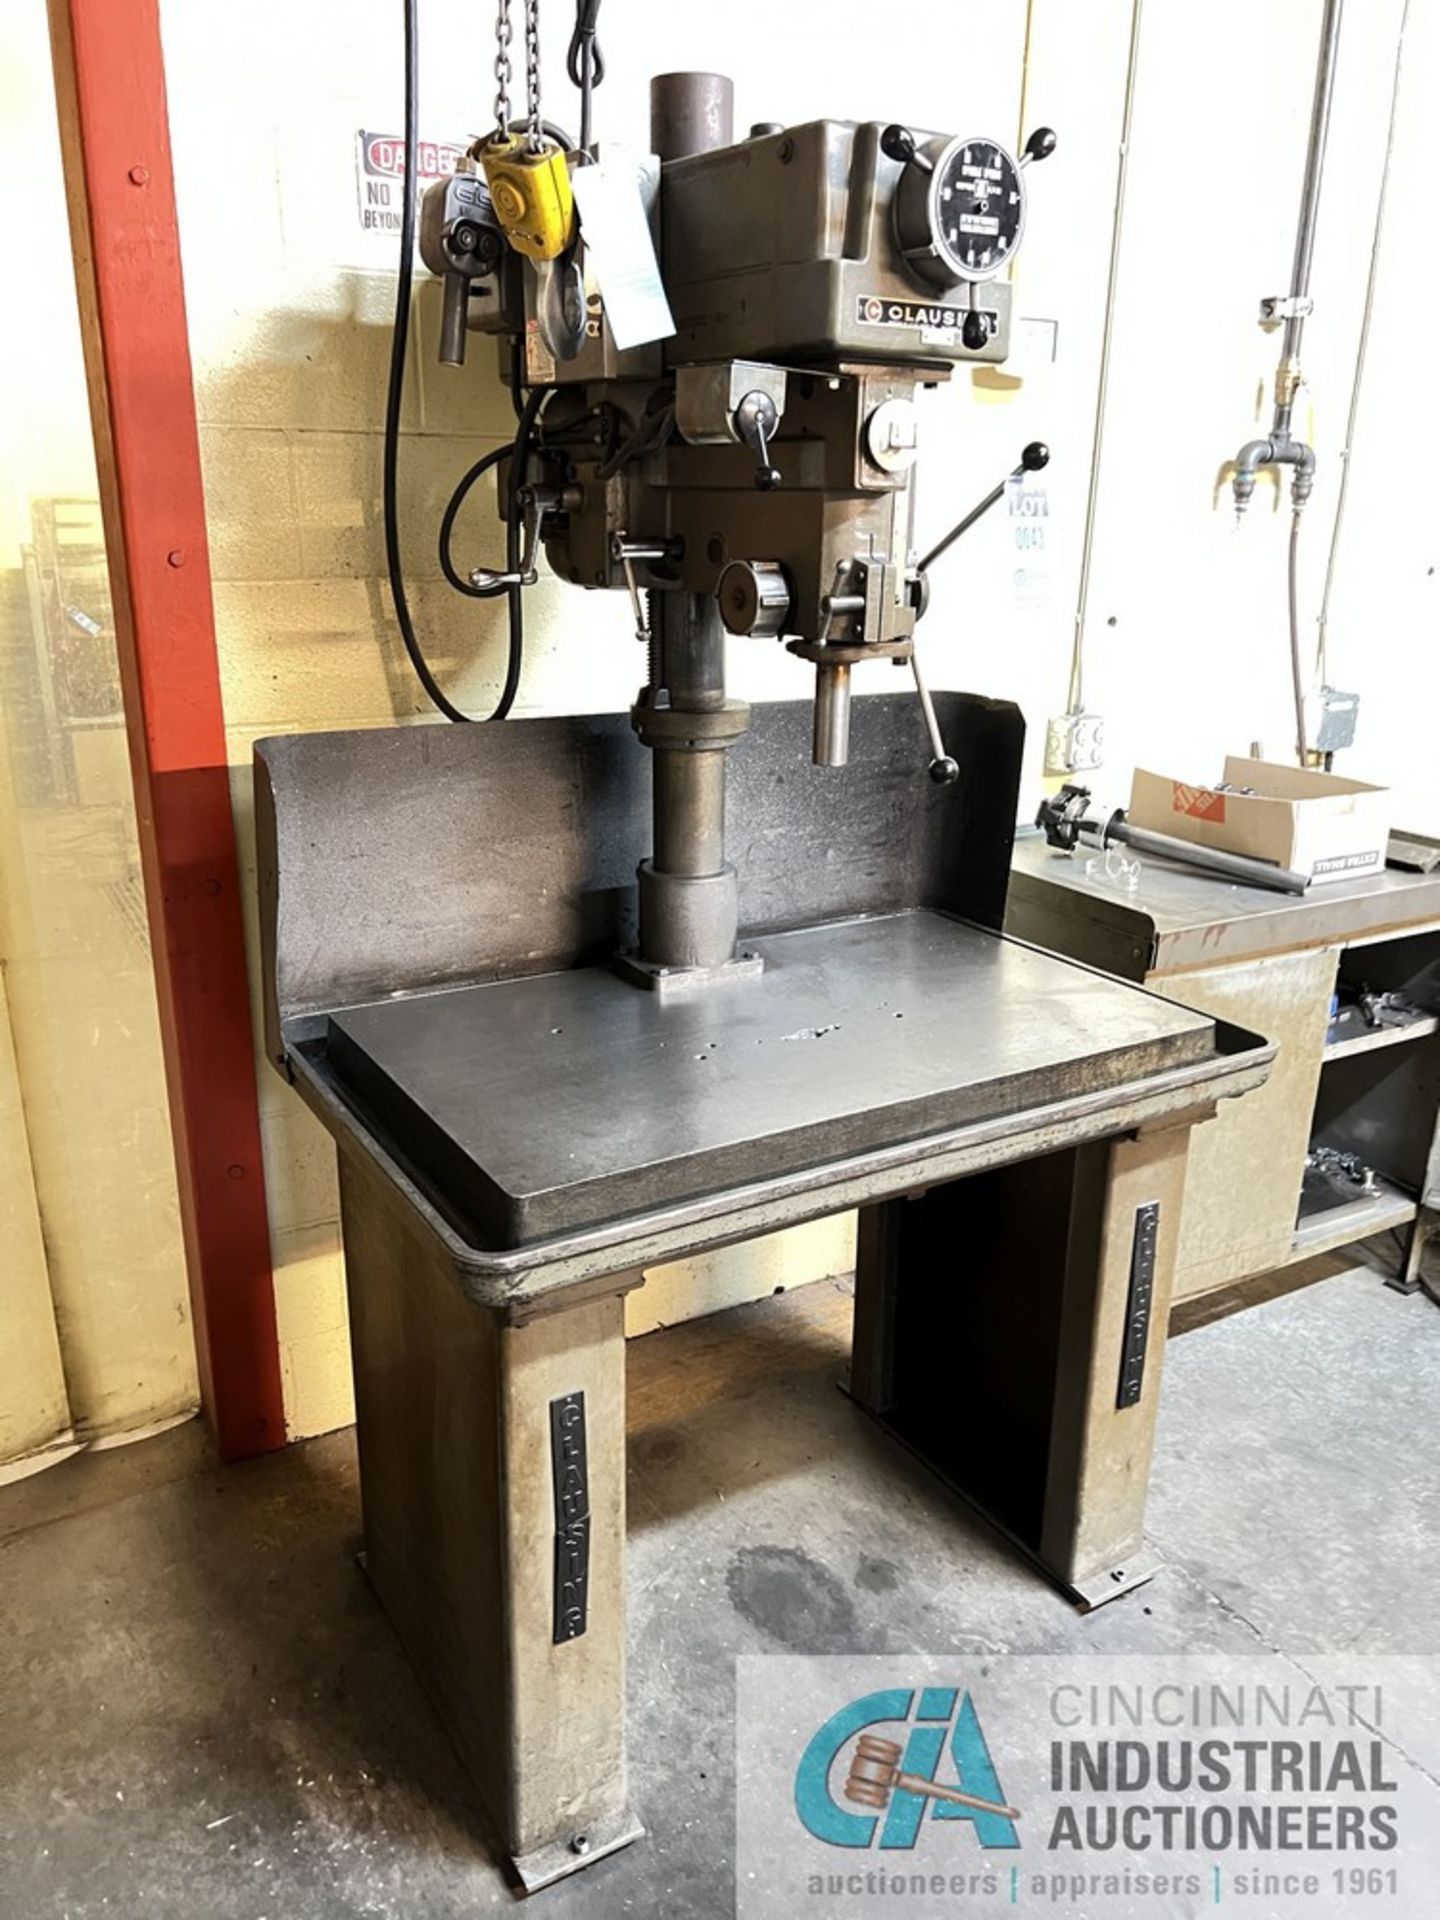 20" CLAUSING MODEL 2285 DRILL PRESS; S/N 514391, 40" X 22" TABLE, SPINDLE SPEEDS: 150-2,000 RPM ** - Image 2 of 6